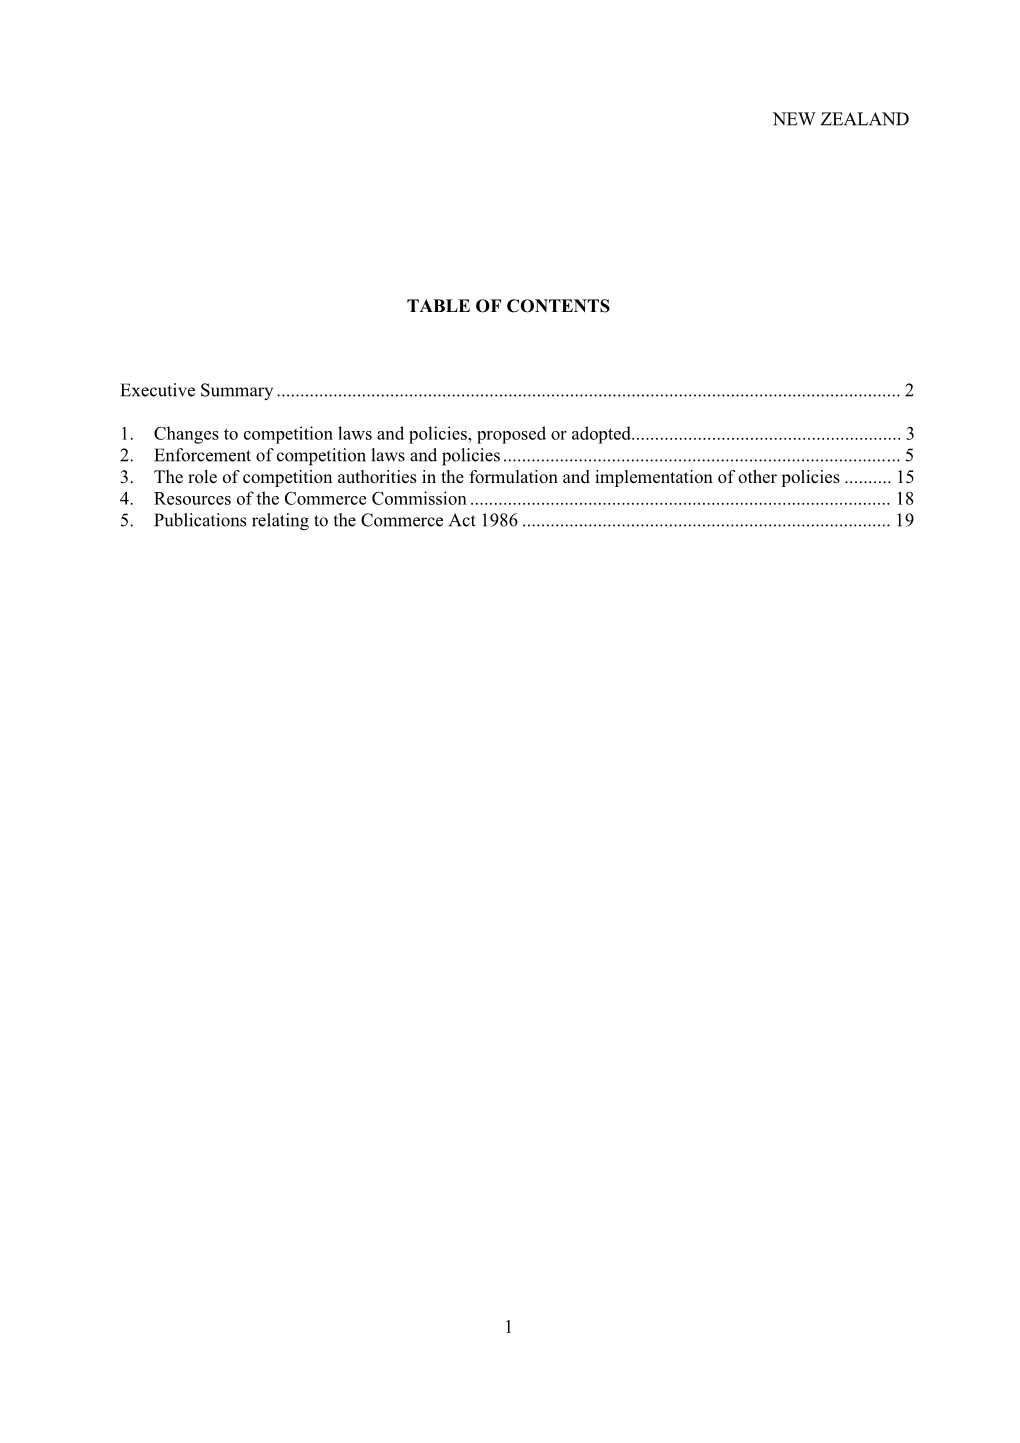 NEW ZEALAND 1 TABLE of CONTENTS Executive Summary